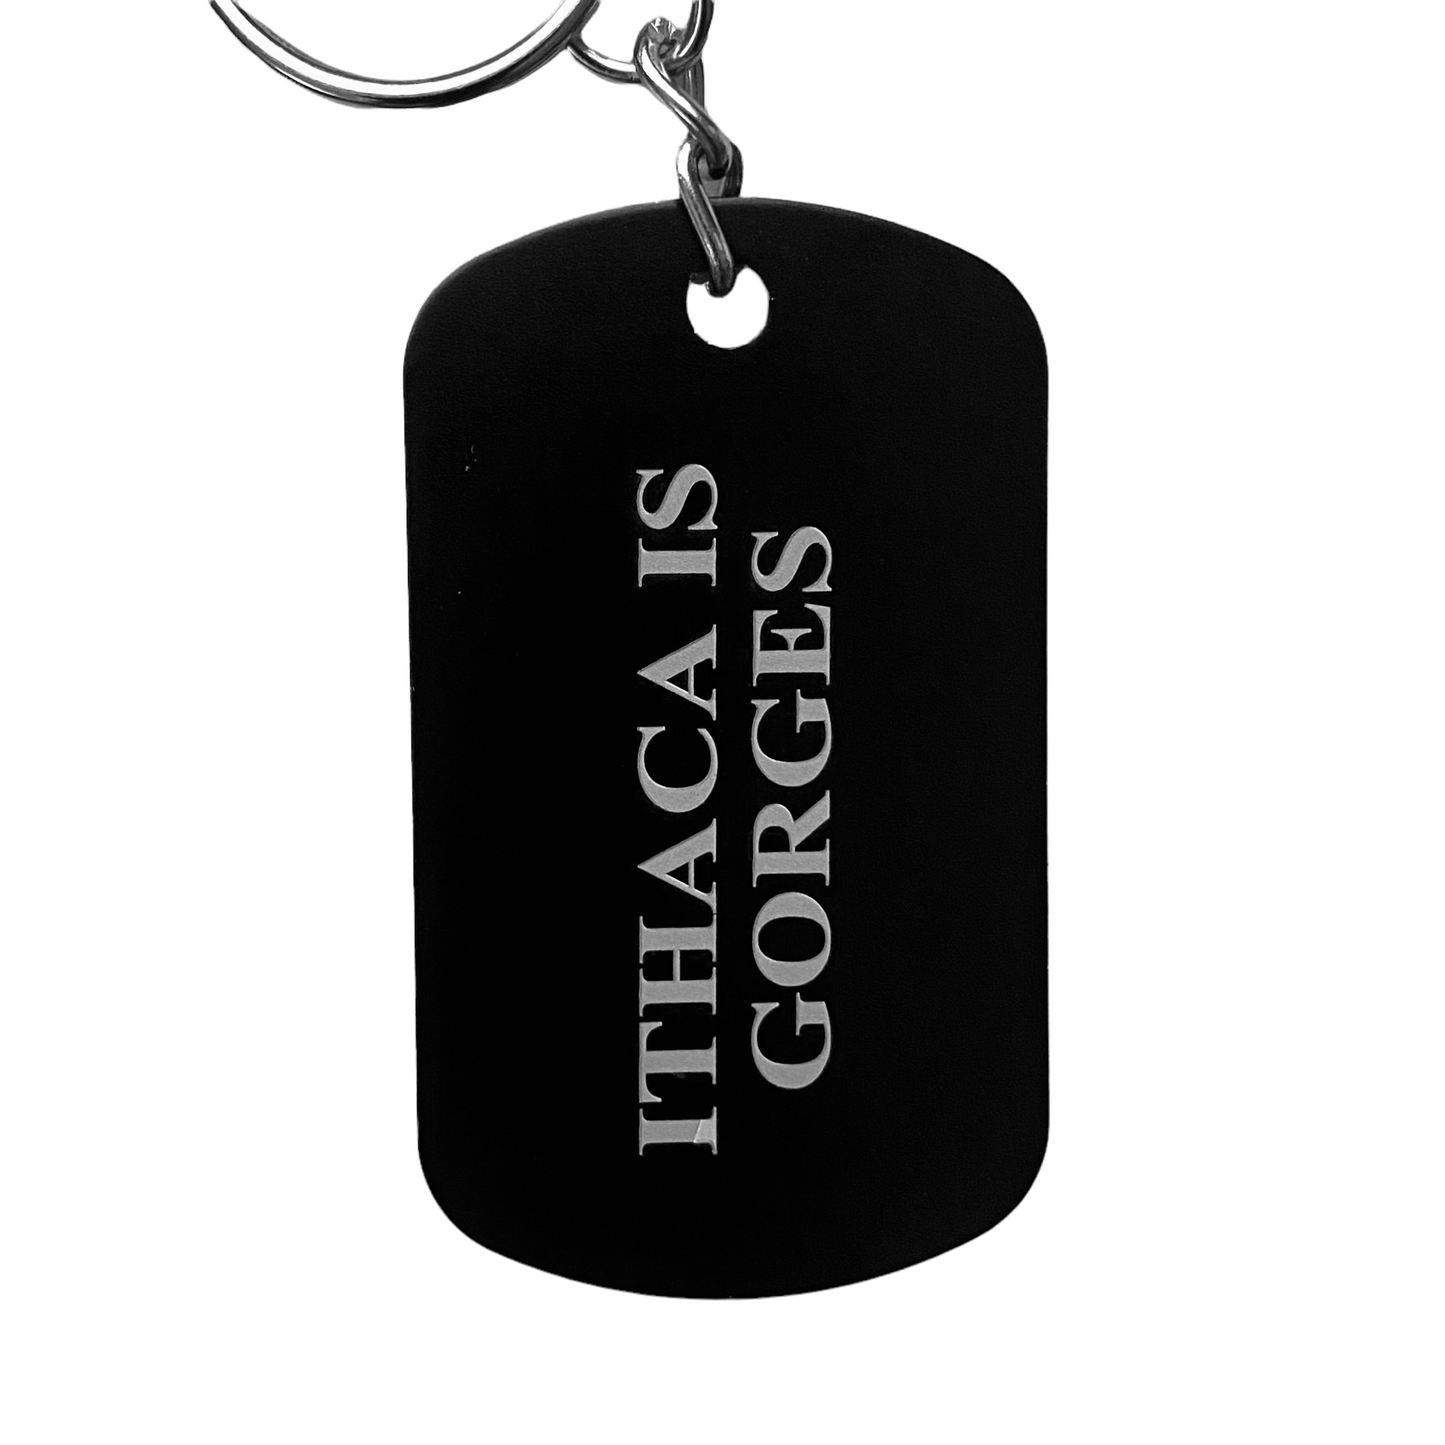 Ithaca Is Gorges, Topographic Keychain